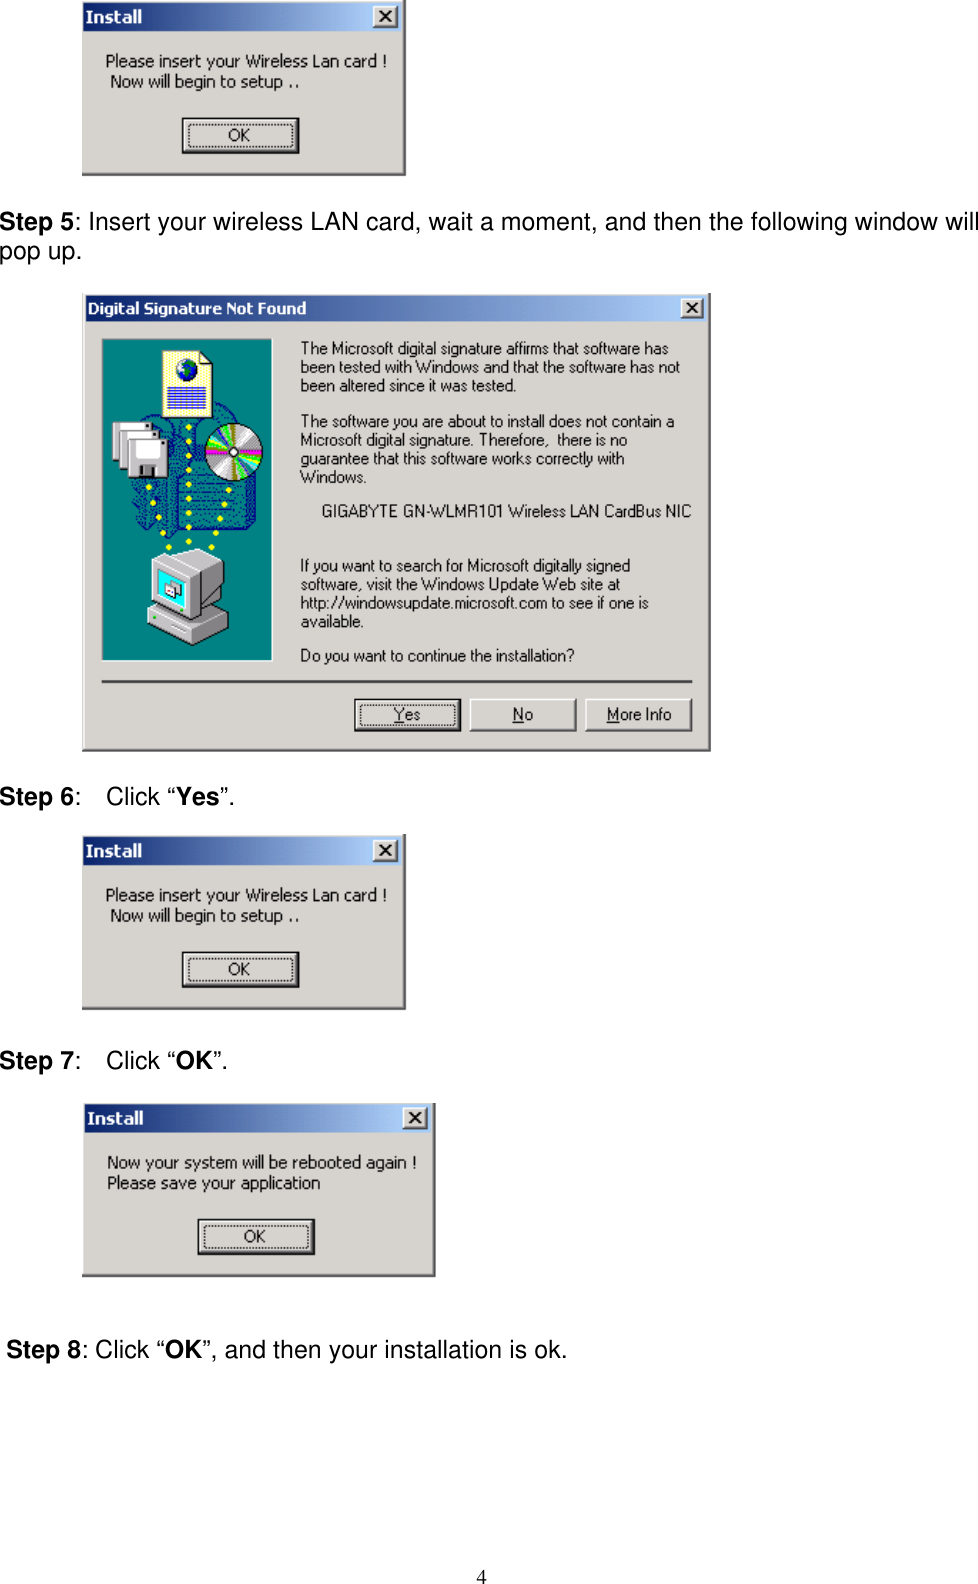 4     Step 5: Insert your wireless LAN card, wait a moment, and then the following window will pop up.    Step 6:  Click “Yes”.             Step 7:  Click “OK”.     Step 8: Click “OK”, and then your installation is ok. 